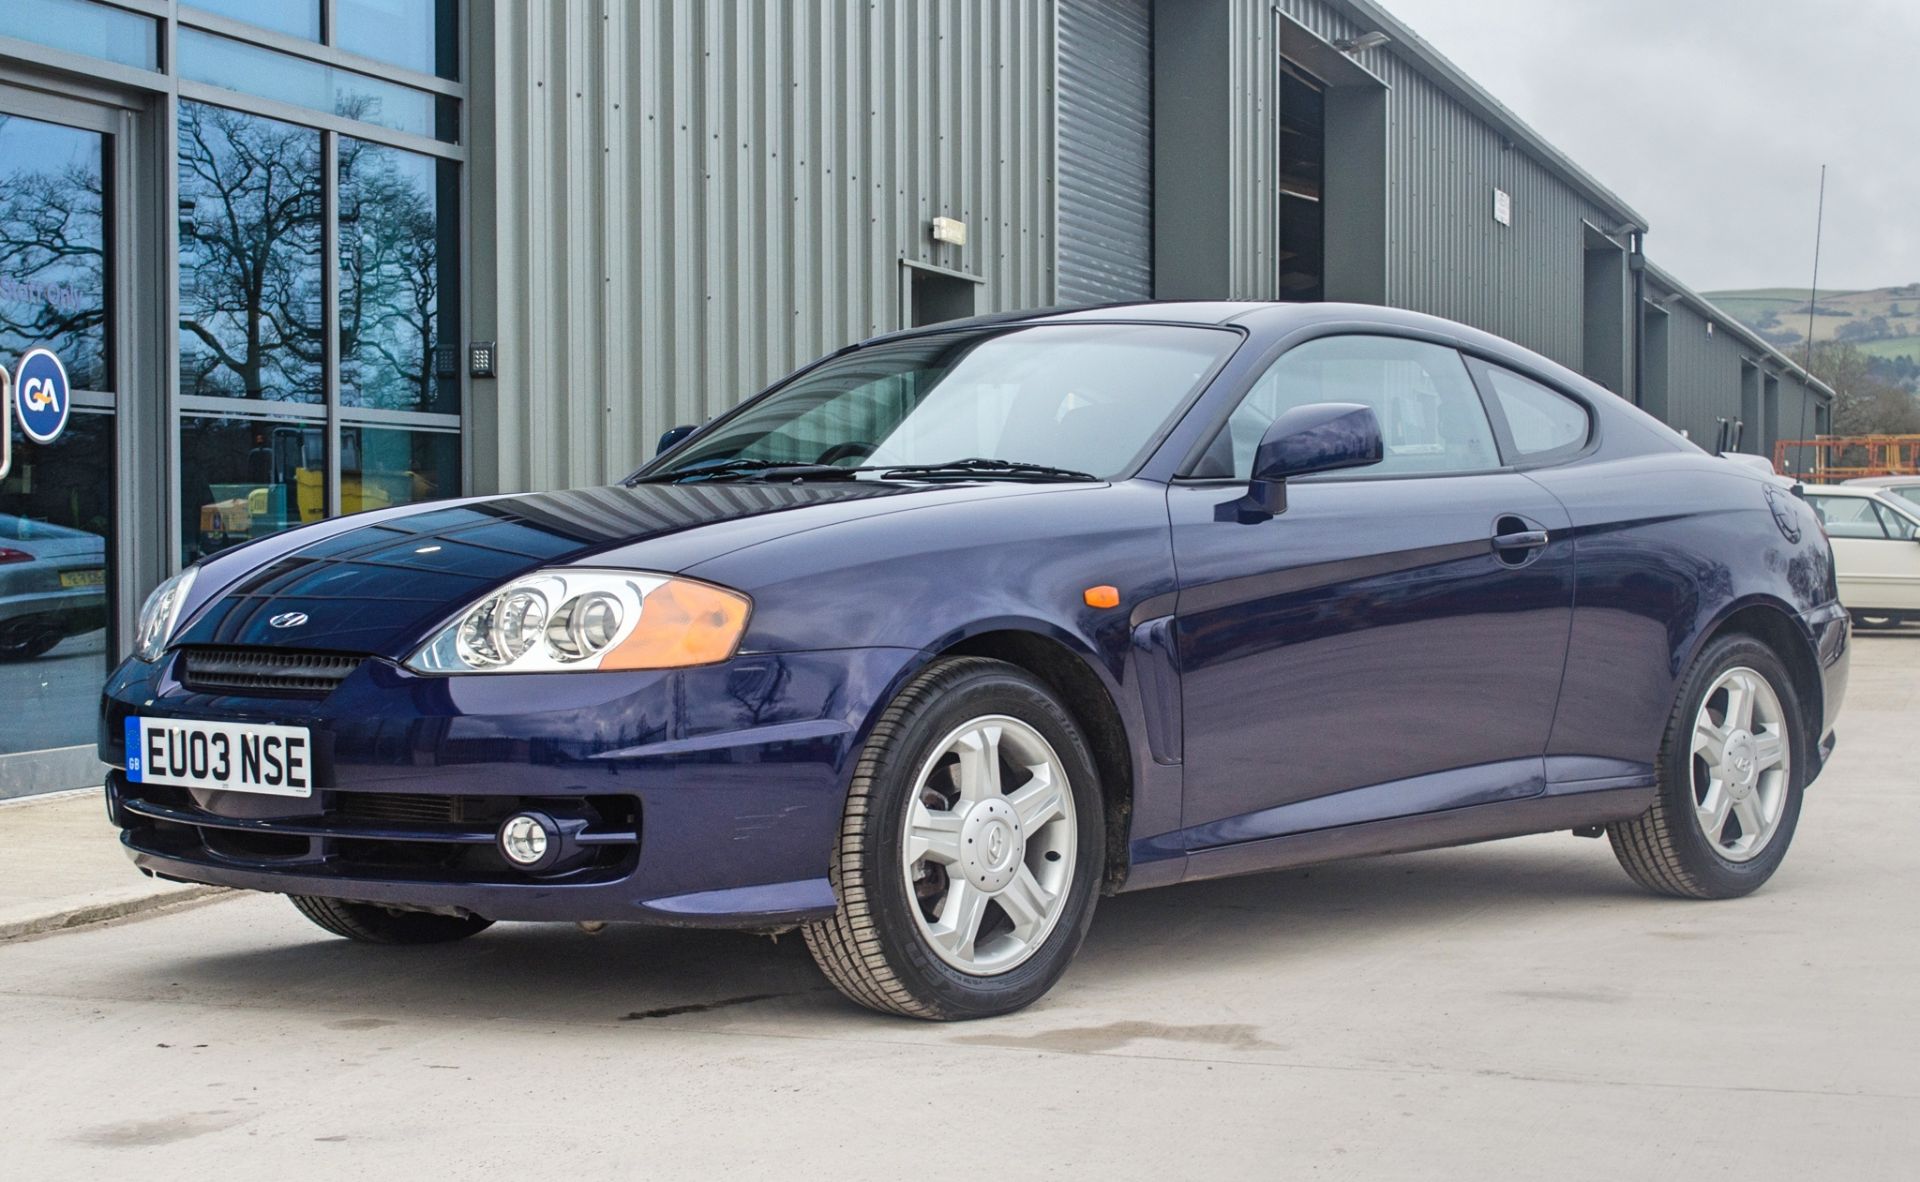 2003 Hyundai Coupe 1.6 S 1600 cc 3 door coupe - Image 3 of 56